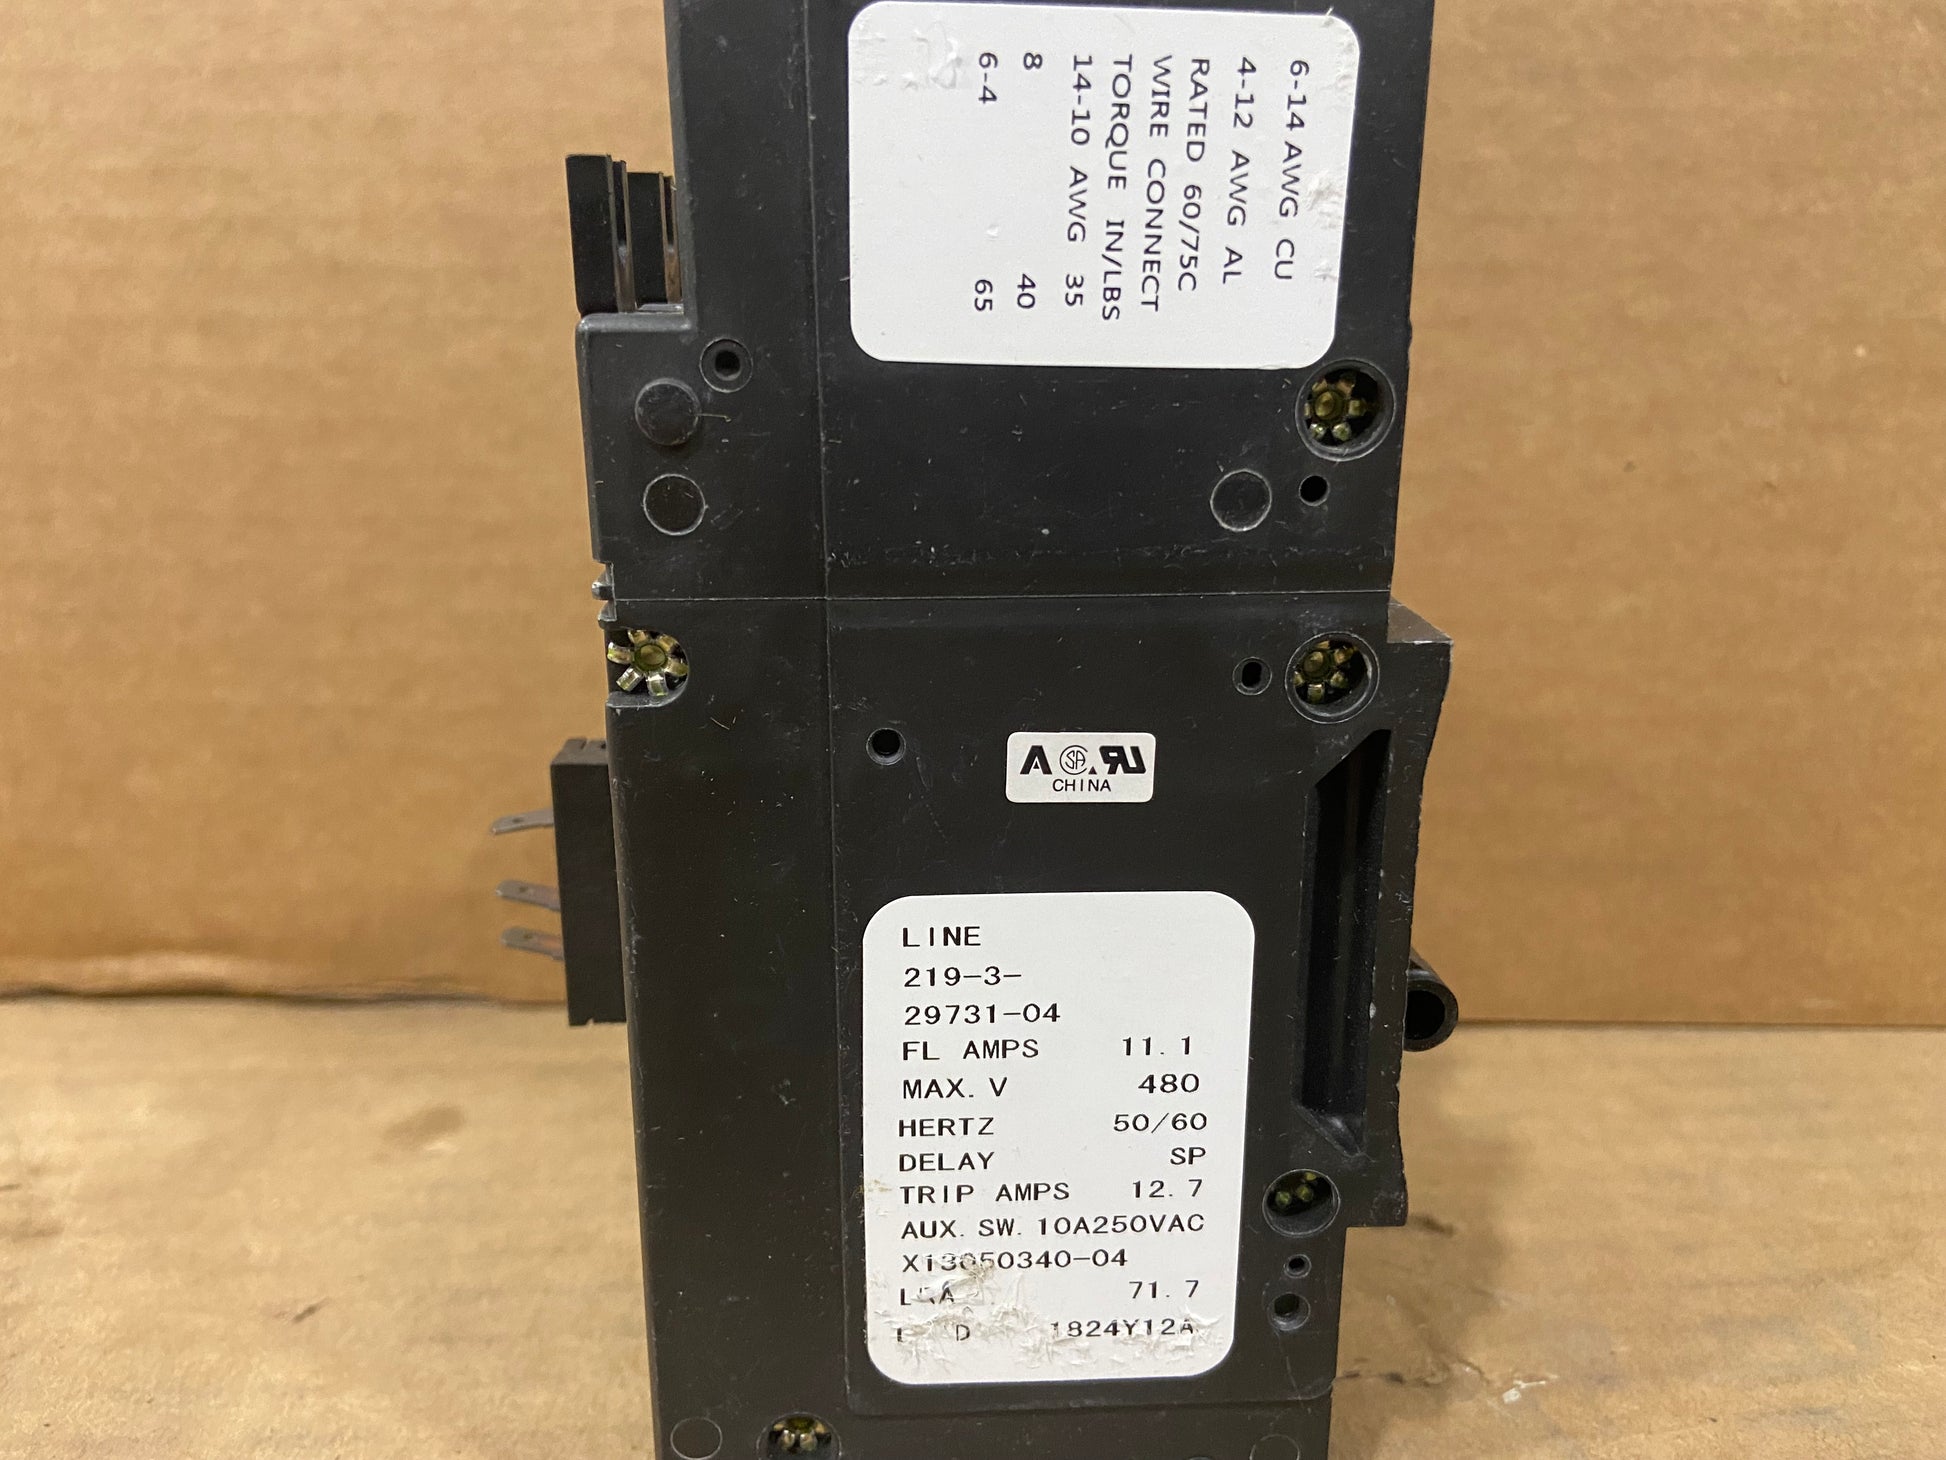 3 POLE 11.1 AMP "219 MULTI-POLE" SERIES HYDRAULIC MAGNETIC CIRCUIT BREAKER PROTECTOR/FOR MANUAL CONTROLLER APPLICATIONS, 480/60-50/1 OR 3